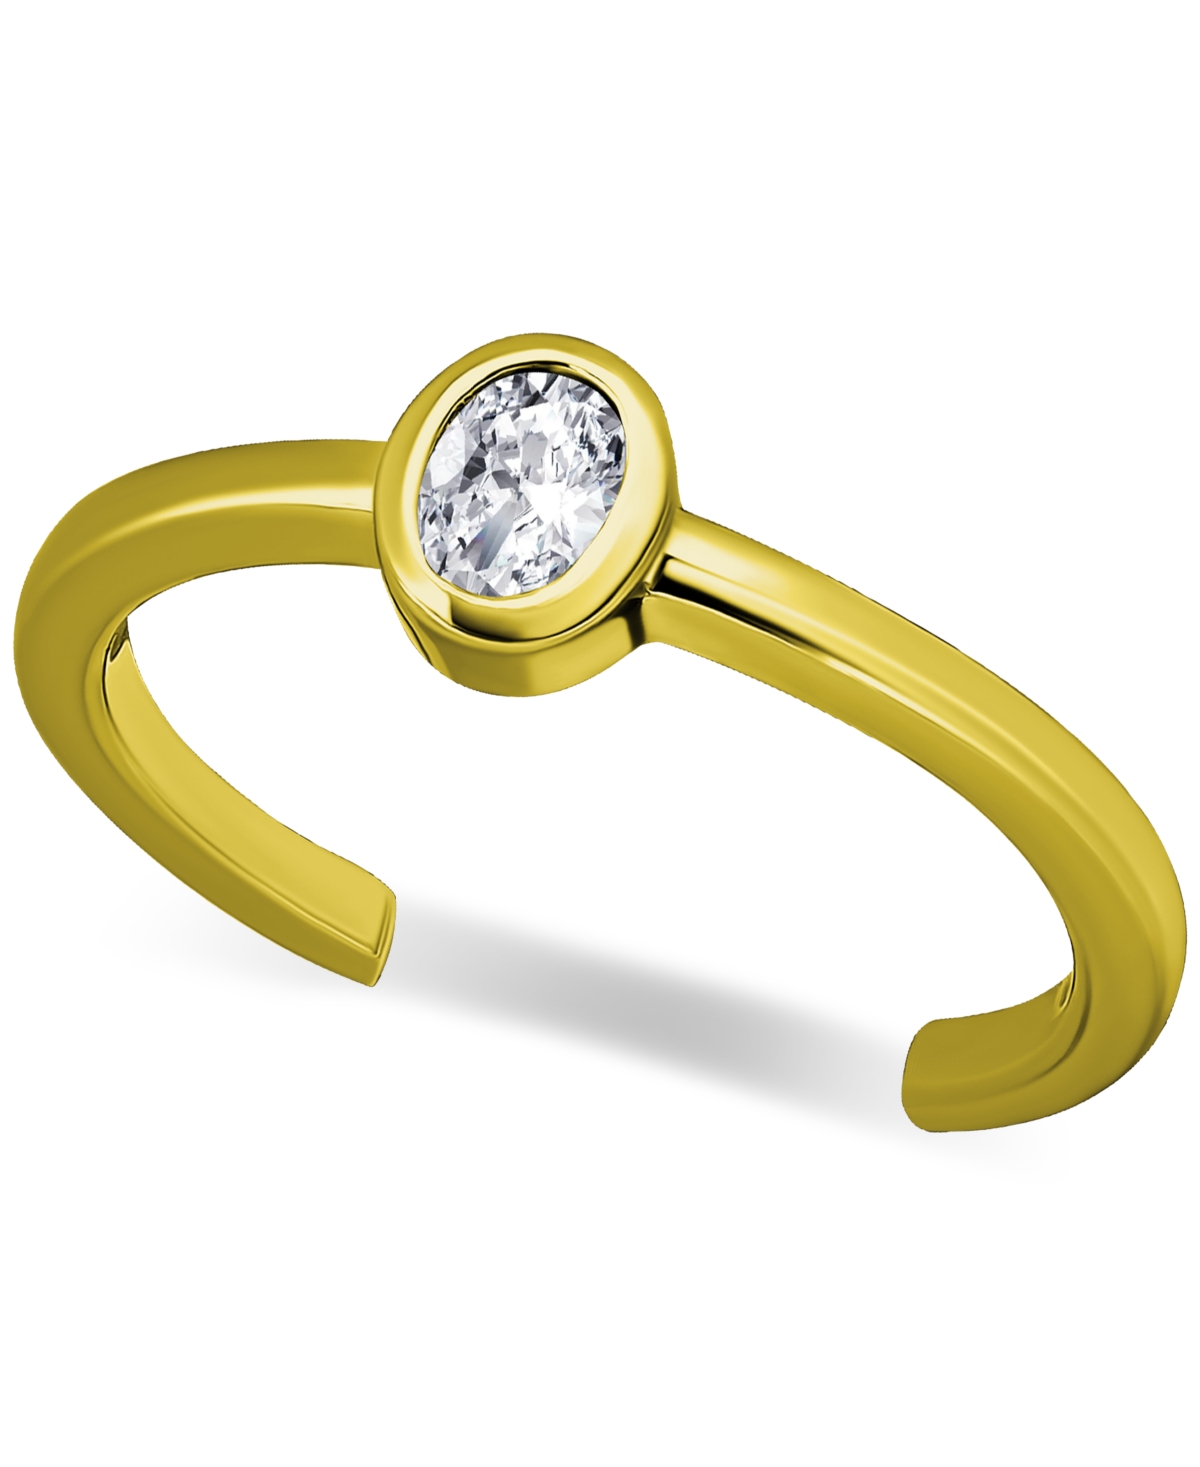 Cubic Zirconia Oval Bezel Toe Ring, Created for Macy's - Gold